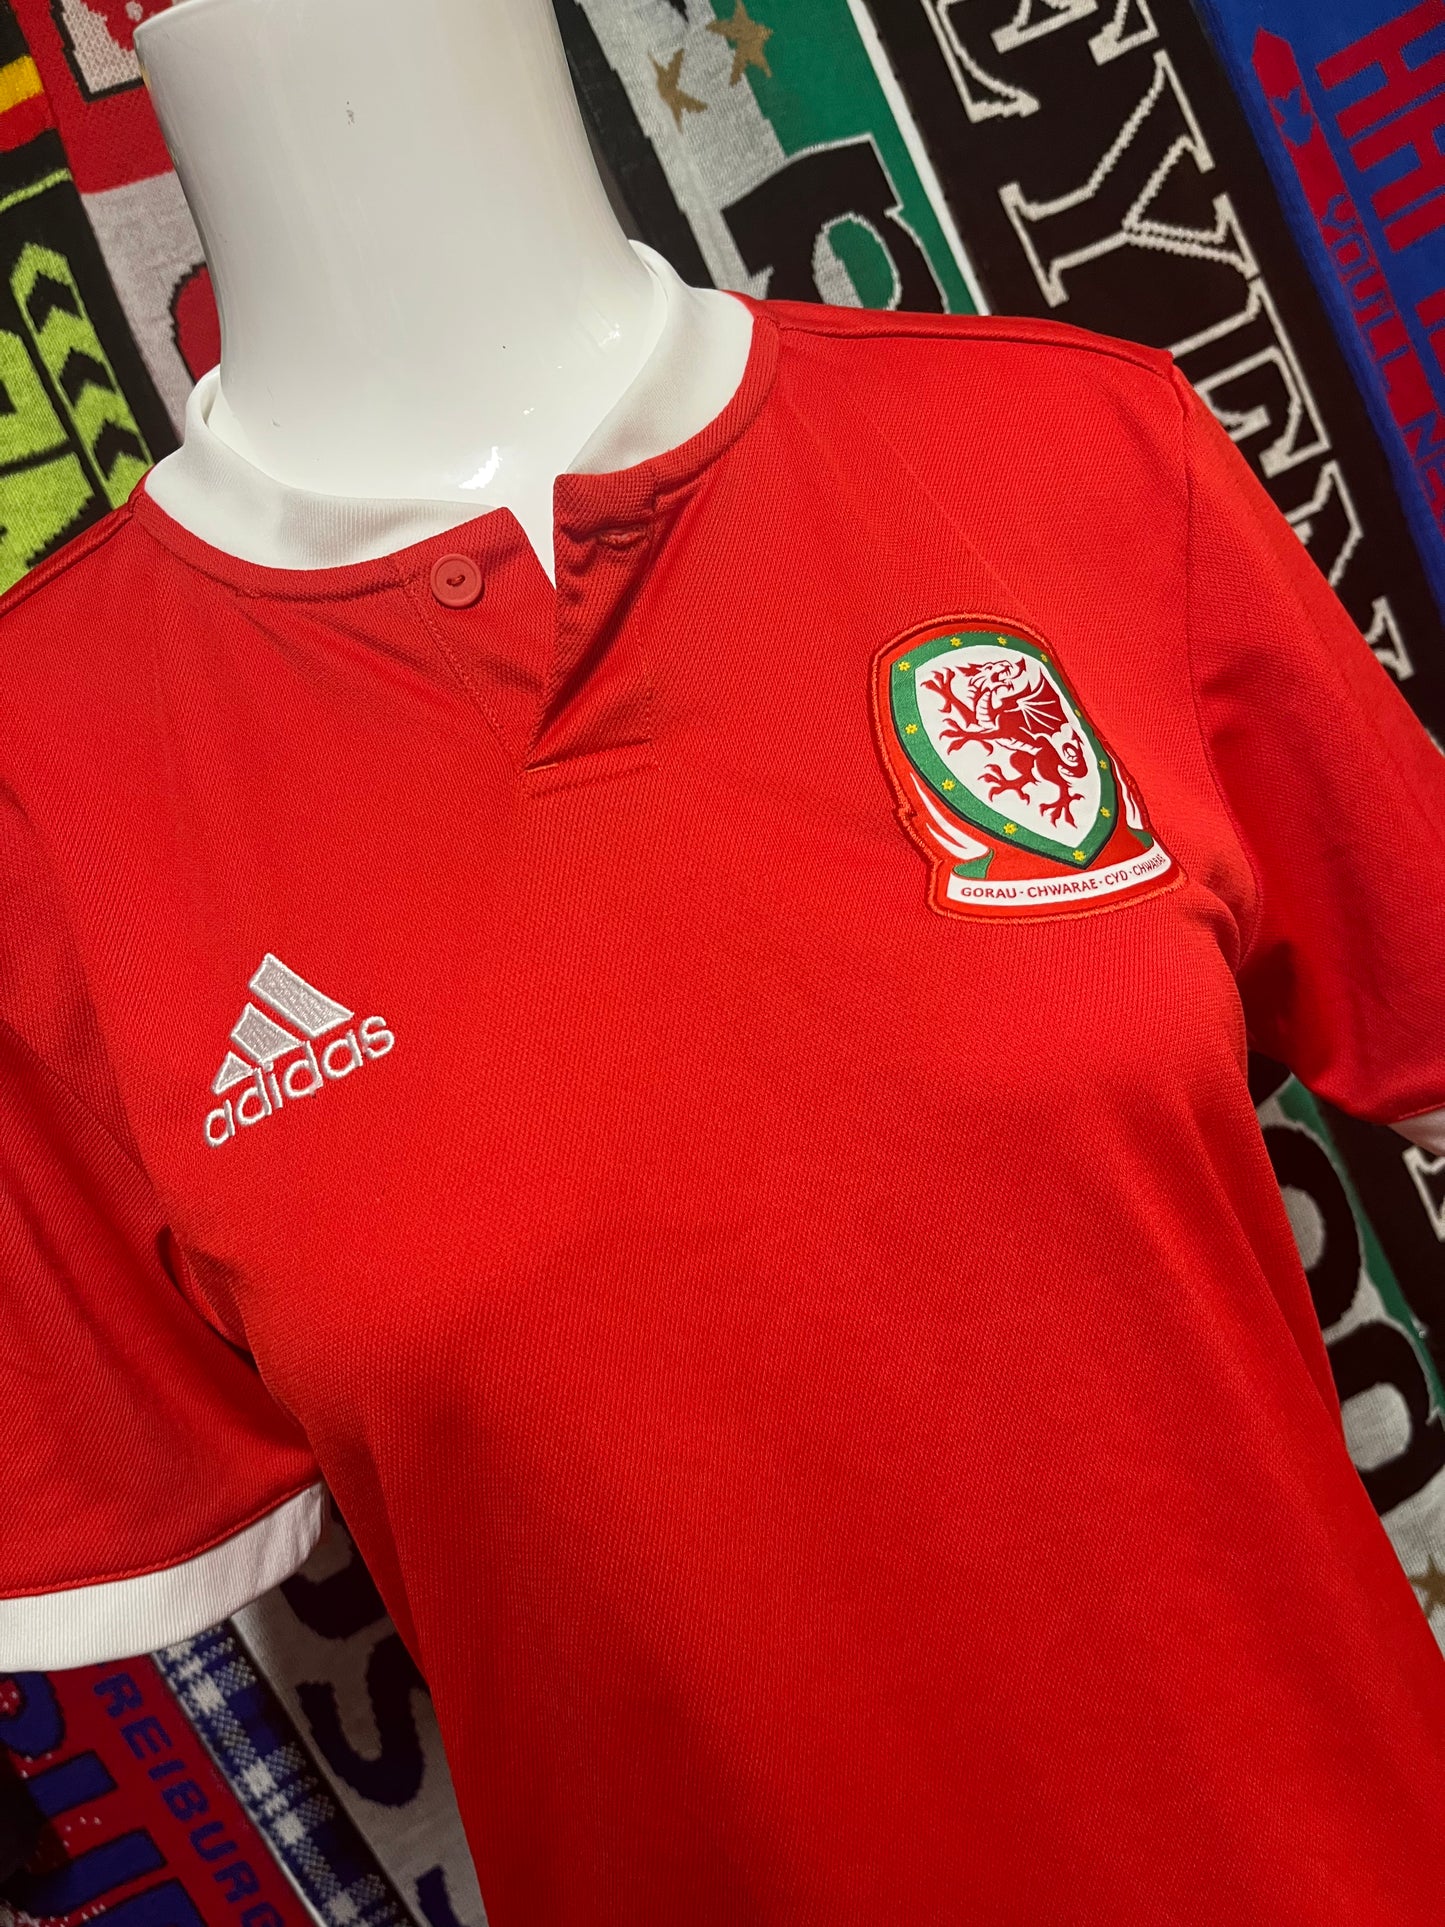 Wales Home 18/19 S